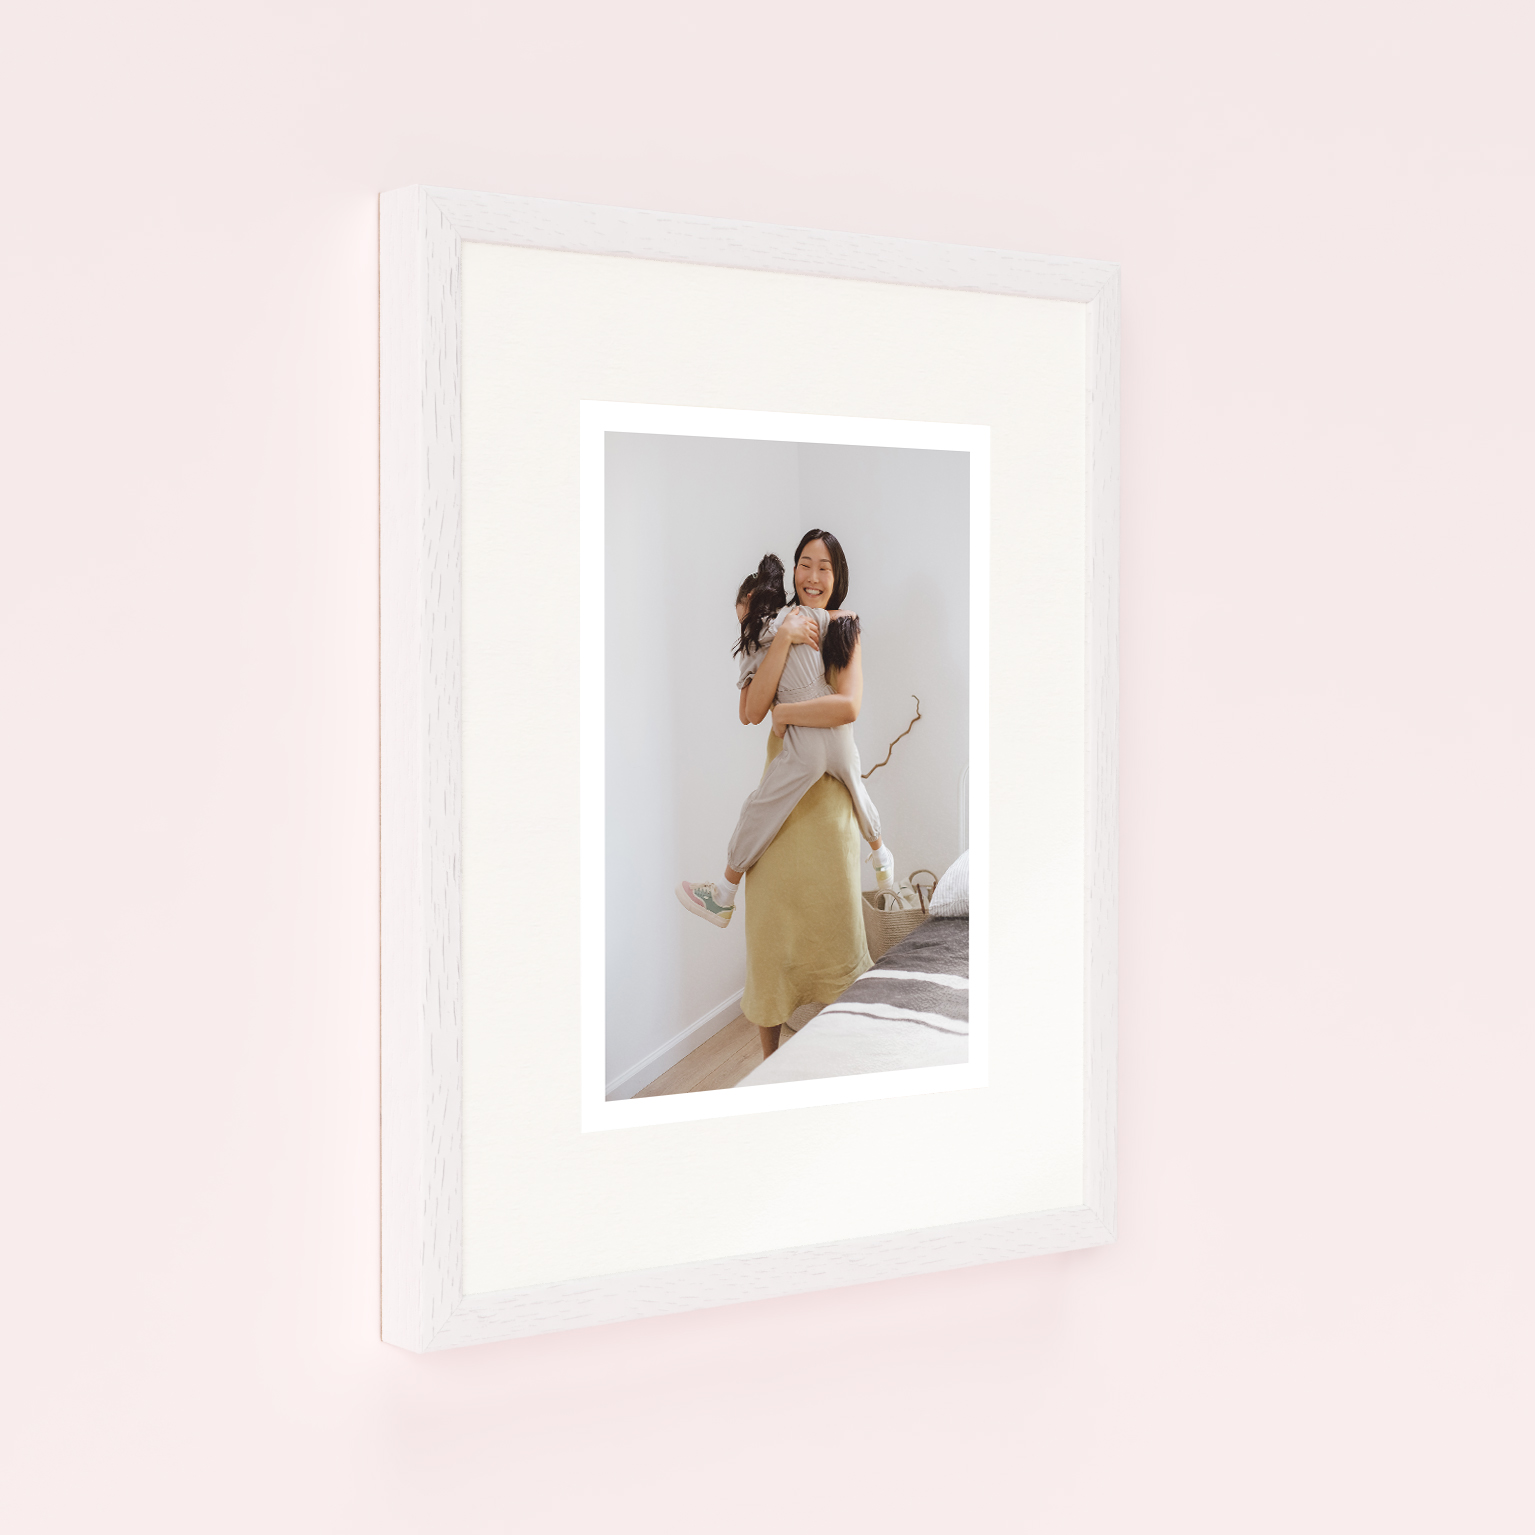 Photo of a framed photo print called 'Medium White Frame'. It is 40cm x 30cm in size, in a Portrait orientation. It has space for 1 photos.